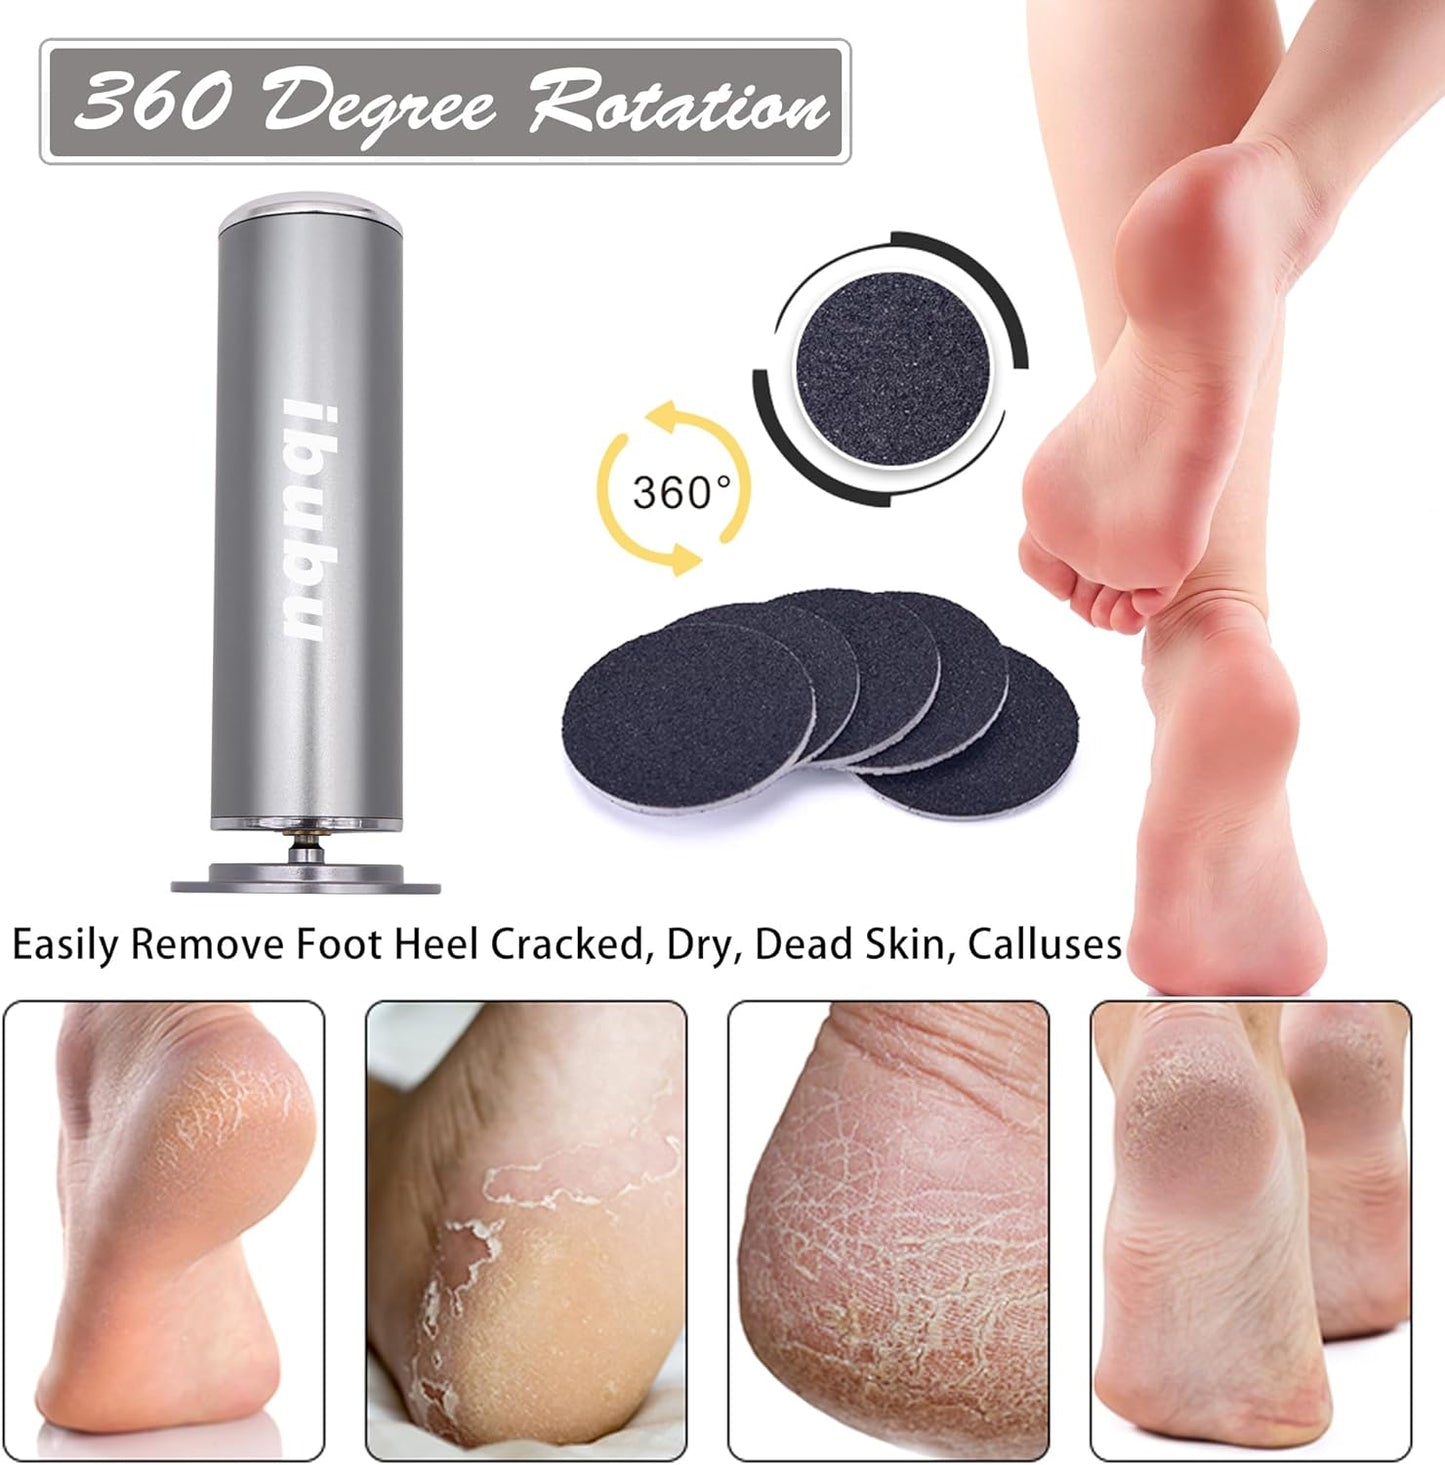 Electric Callus Remover Powerful Electric Foot File Grinder Sander Machine with Speed Controller and 60PCS Replacement Sandpaper Disk Pedicure Feet Care Tool for Dead Skin Removal Gray